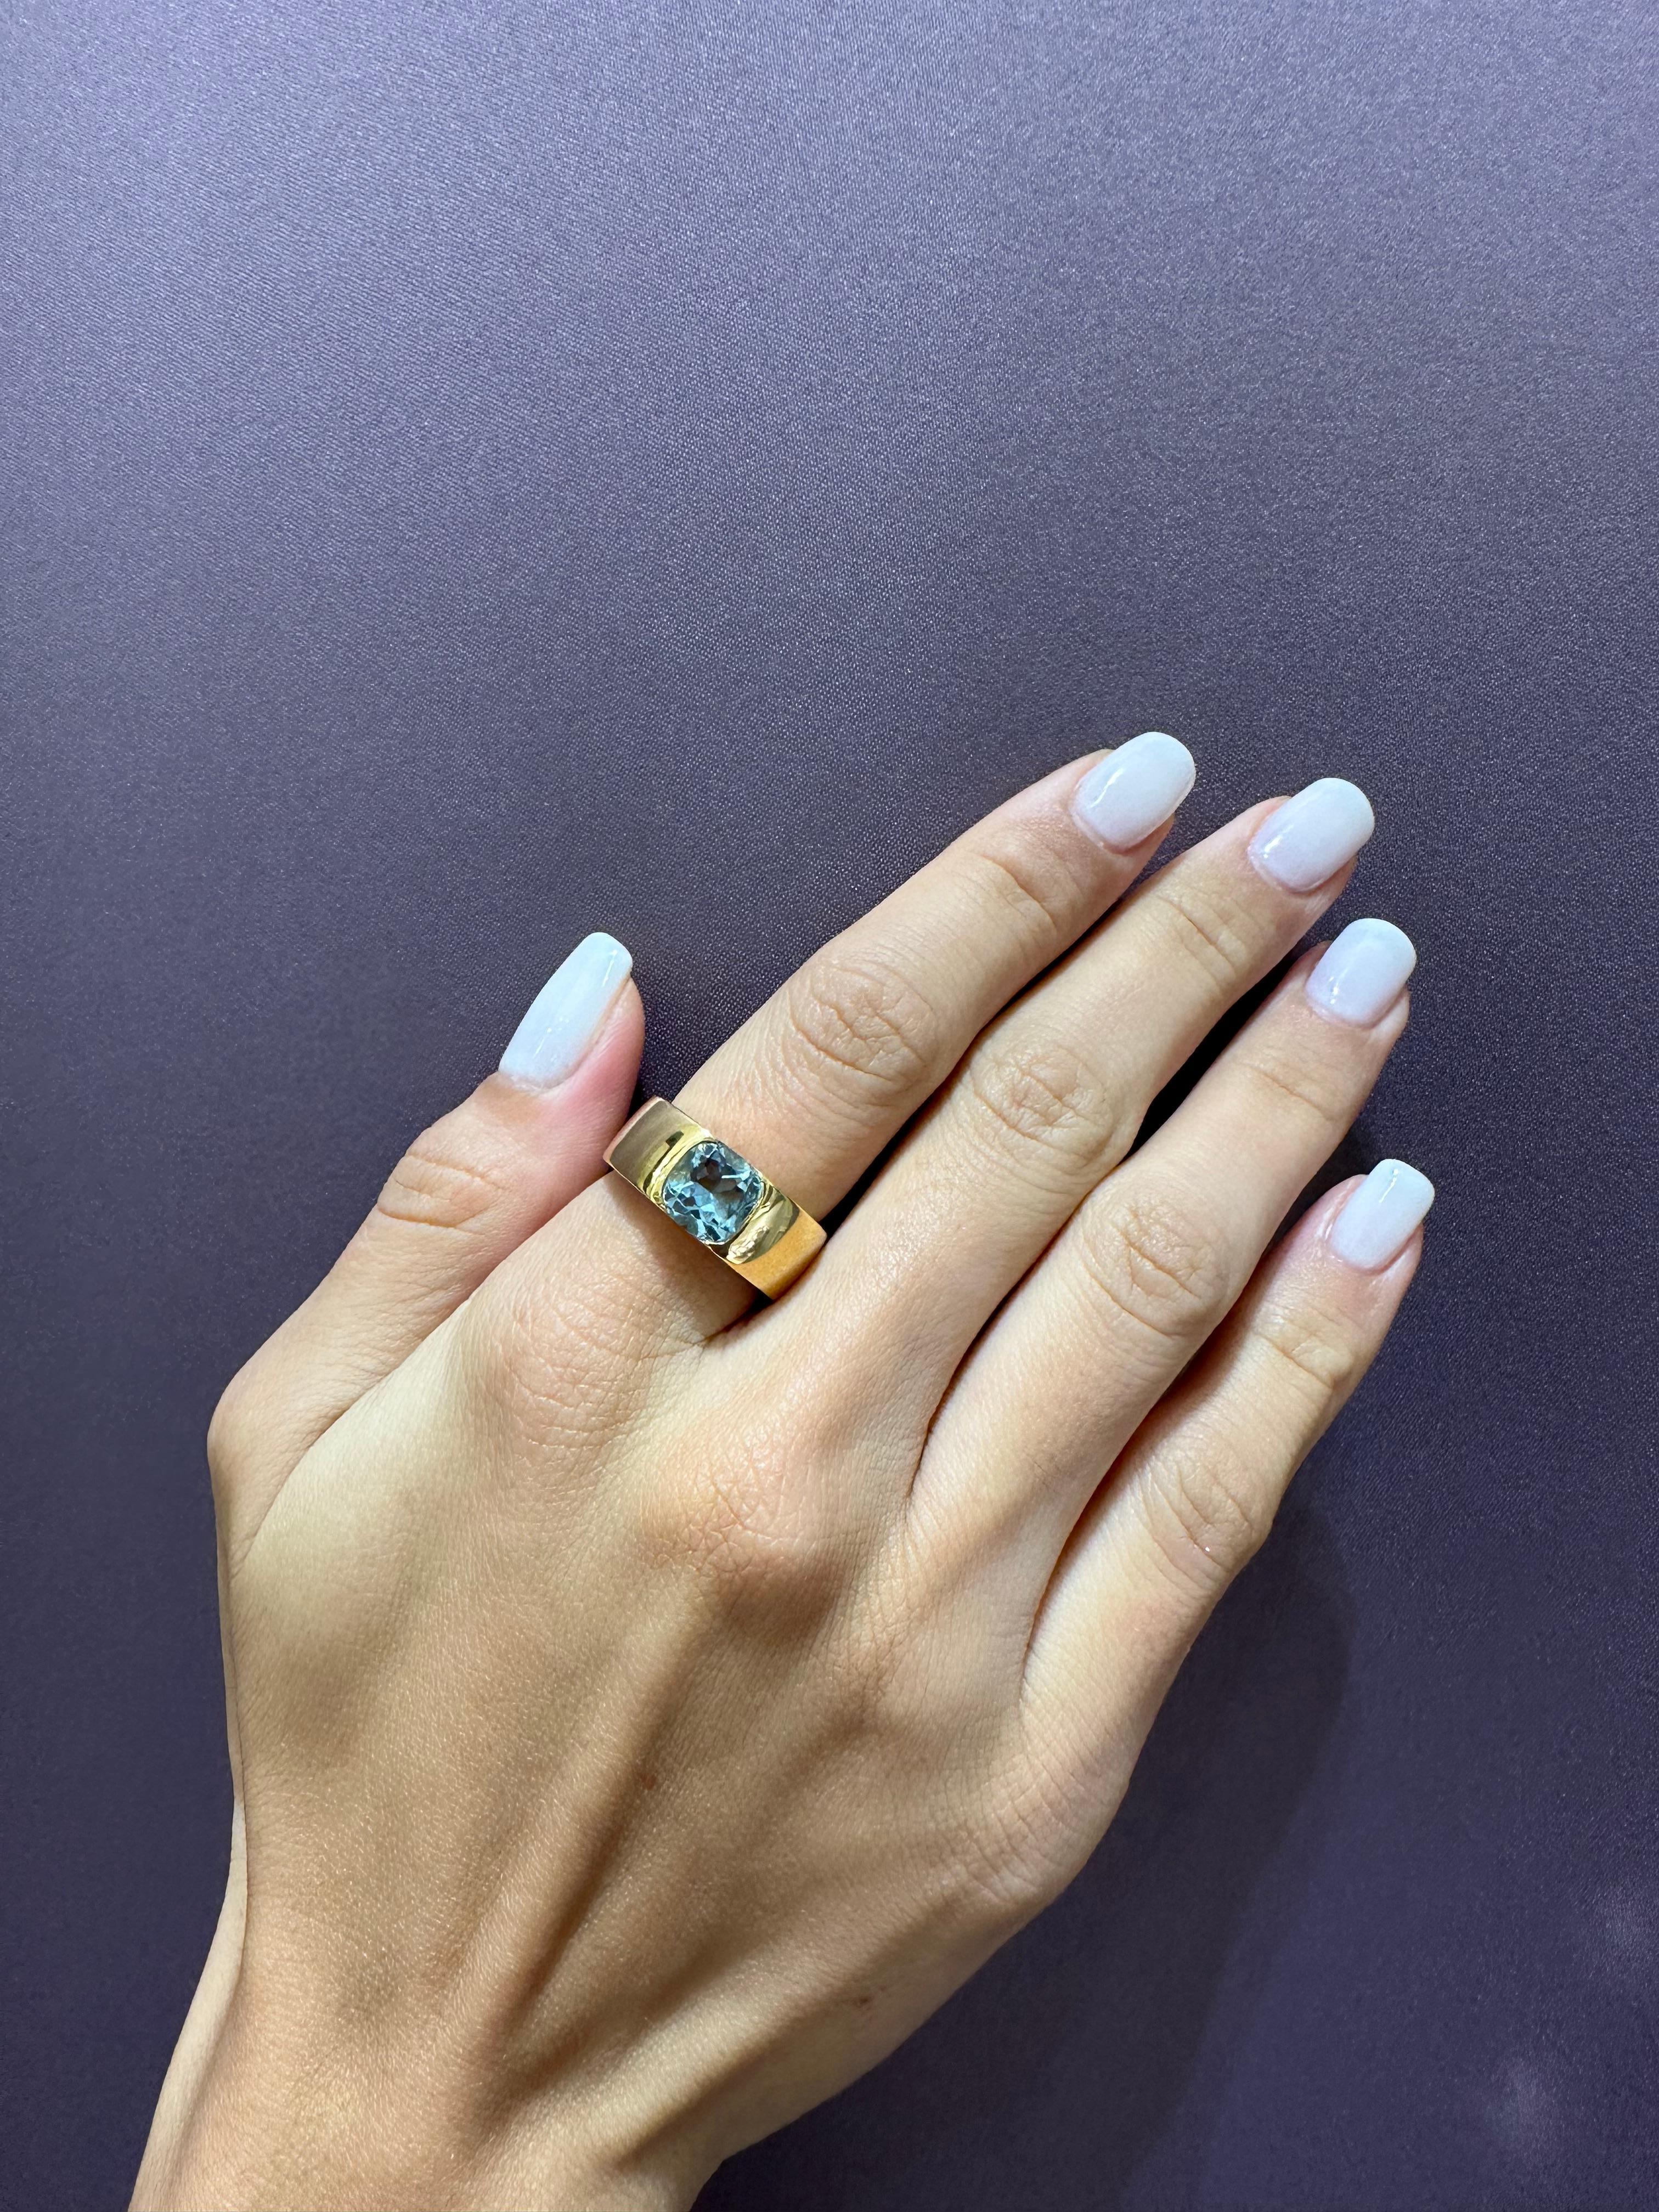 Rosior Contemporary Band Ring set in Yellow Gold with a Cushion Cut Aquamarine weighing 2,19 ct.
Weight in 19.2K gold: 14.8 g.
Handmade in Portugal.
Stamped by the portuguese assay office as 19.2K gold.
Stamped with Rosior hallmark.
Loyal to